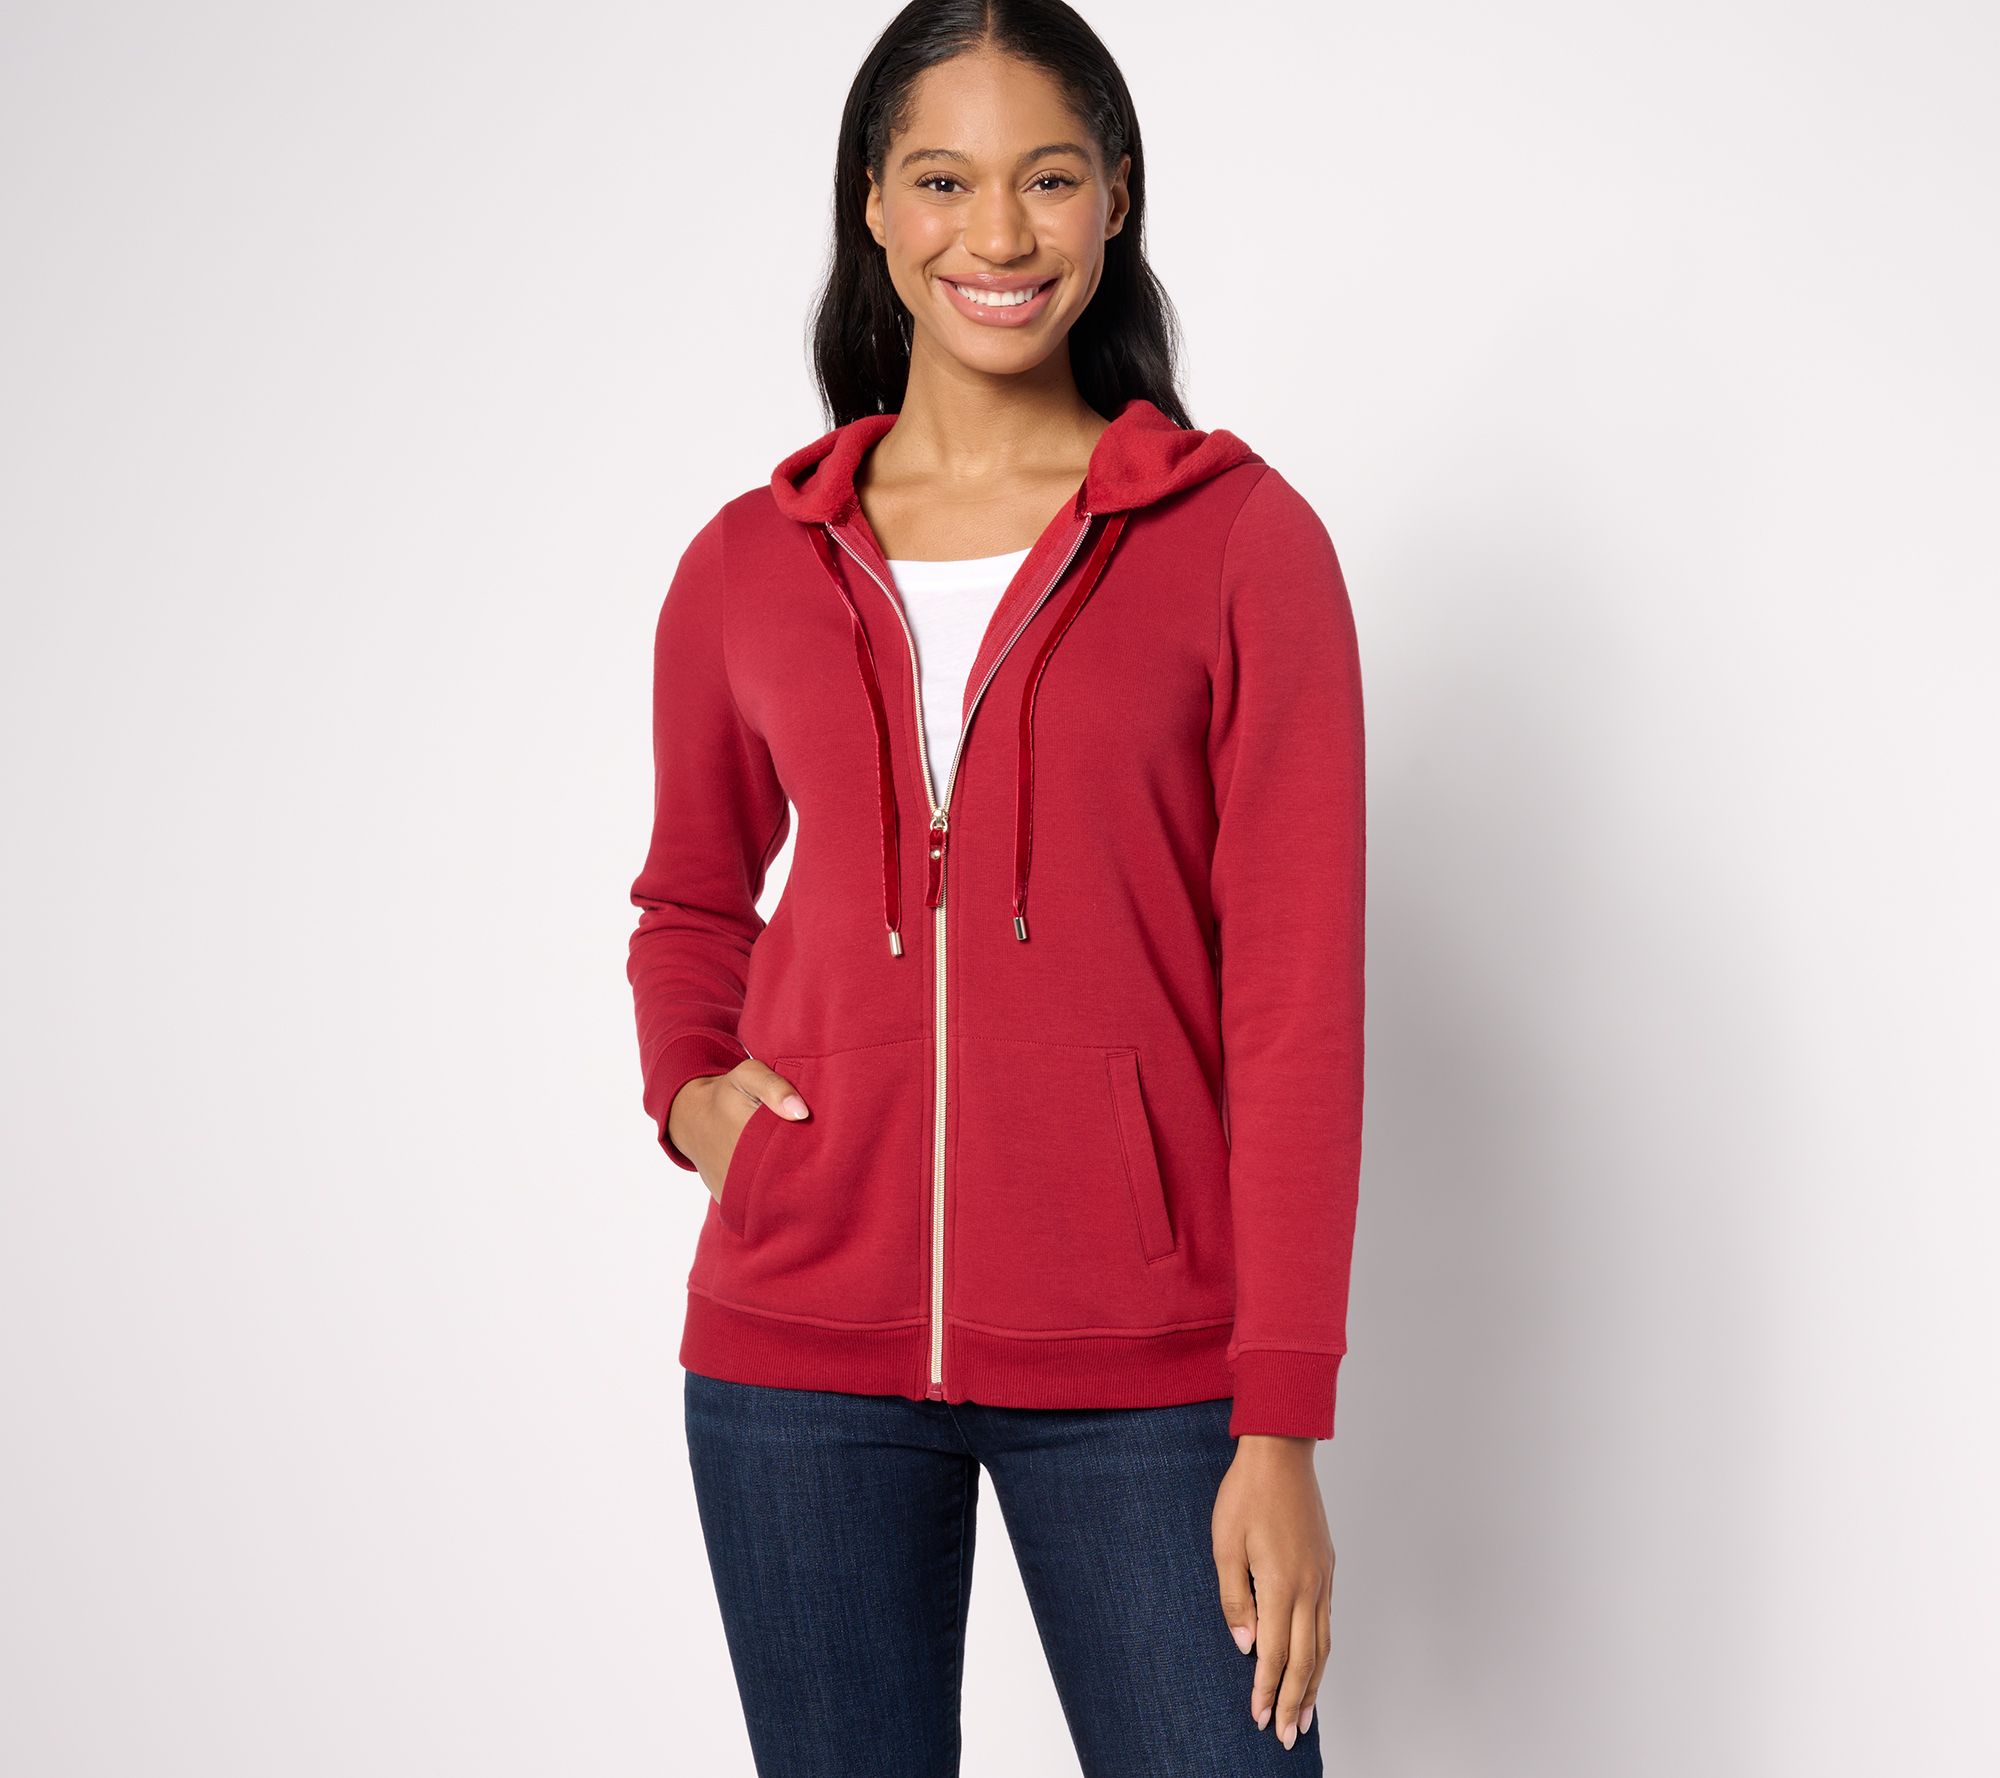 Guest Fit Review: Water Bound Hoodie, Move With Ease Jacket, Mix